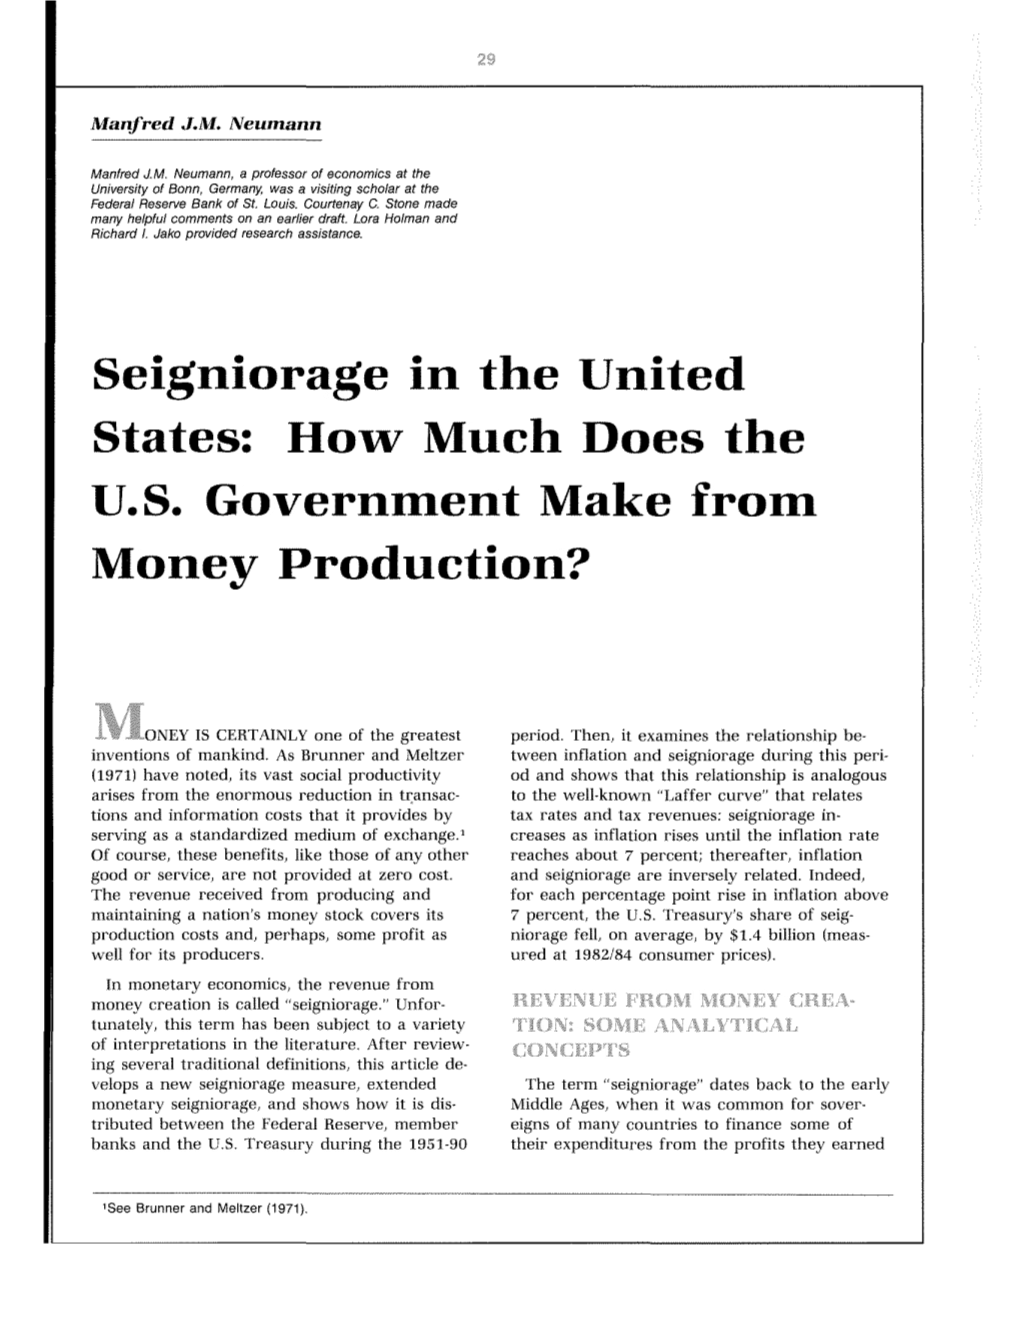 Seigniorage in the United States: How Much Does the U.S. Government